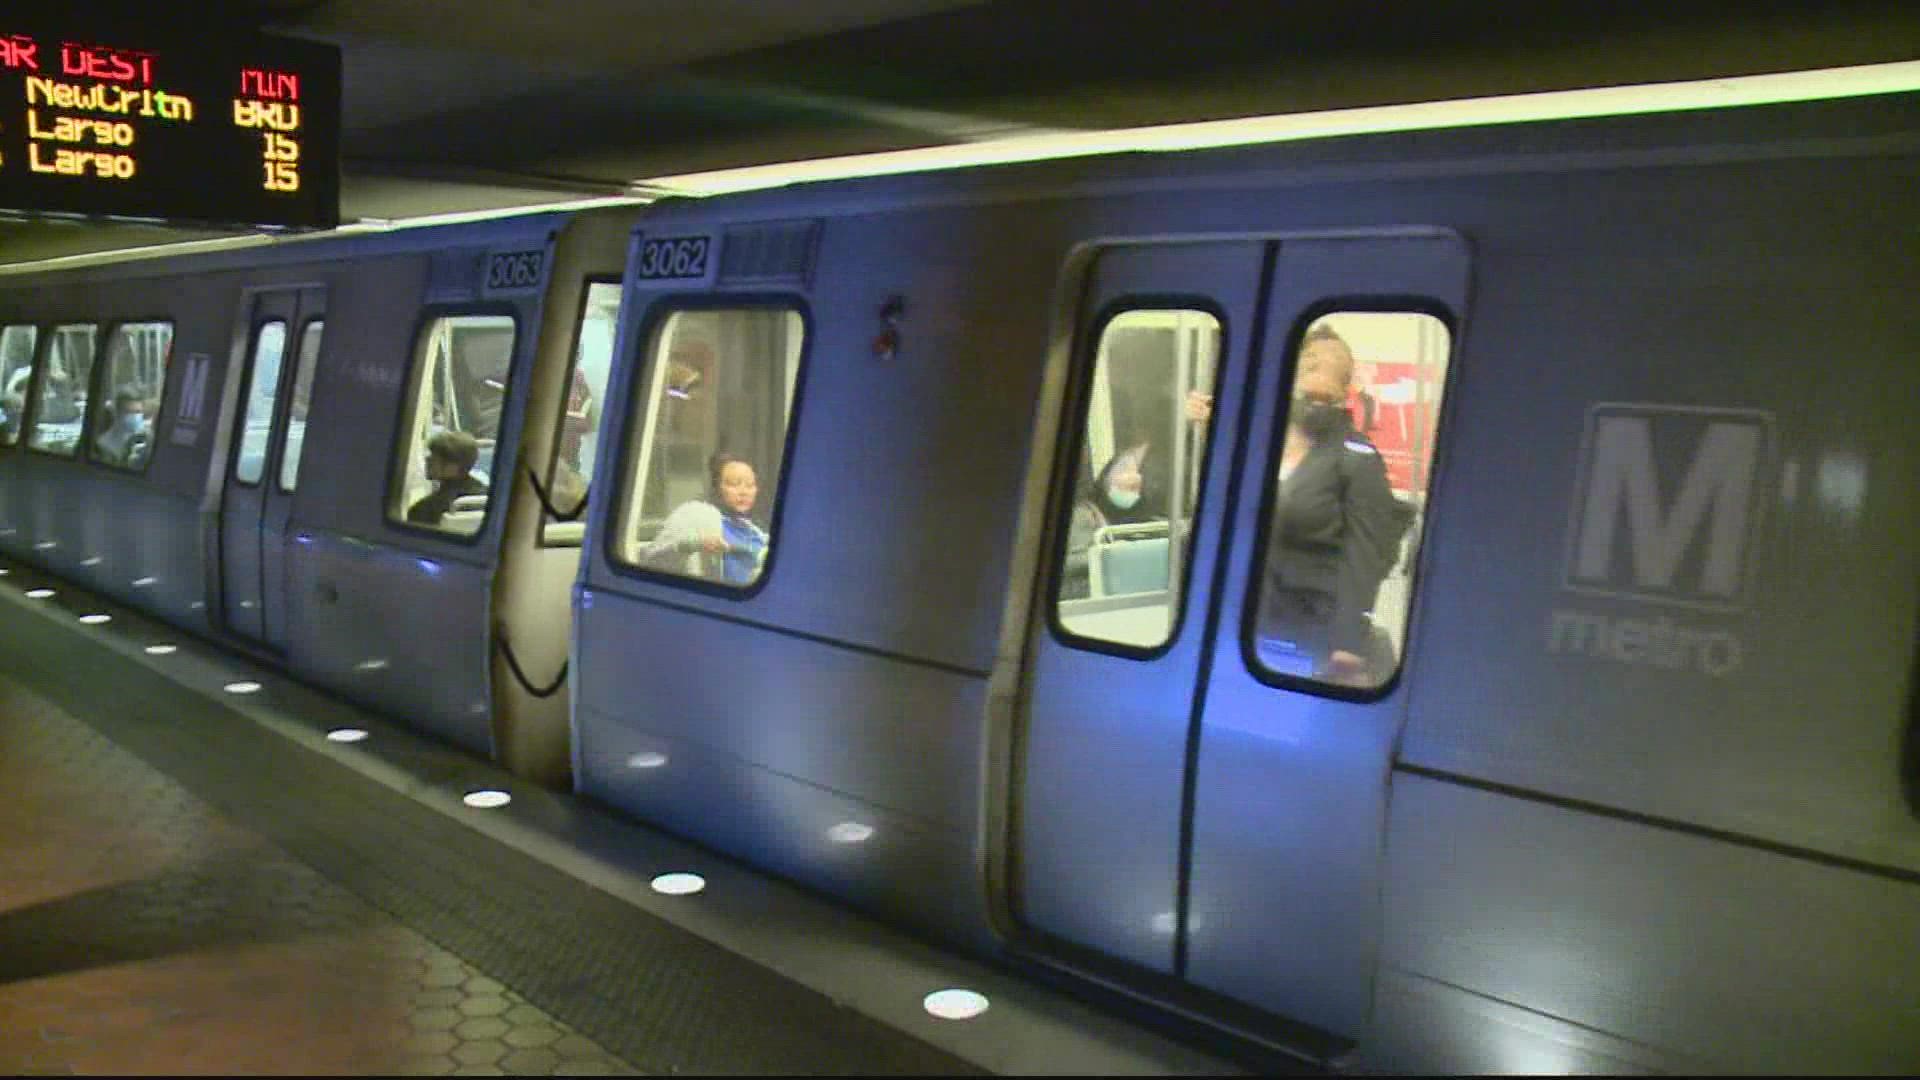 Right now Blue and Orange line riders have an average wait time of 15 minutes. With more trains being added that should go down to 12-minutes for mid-week commute.